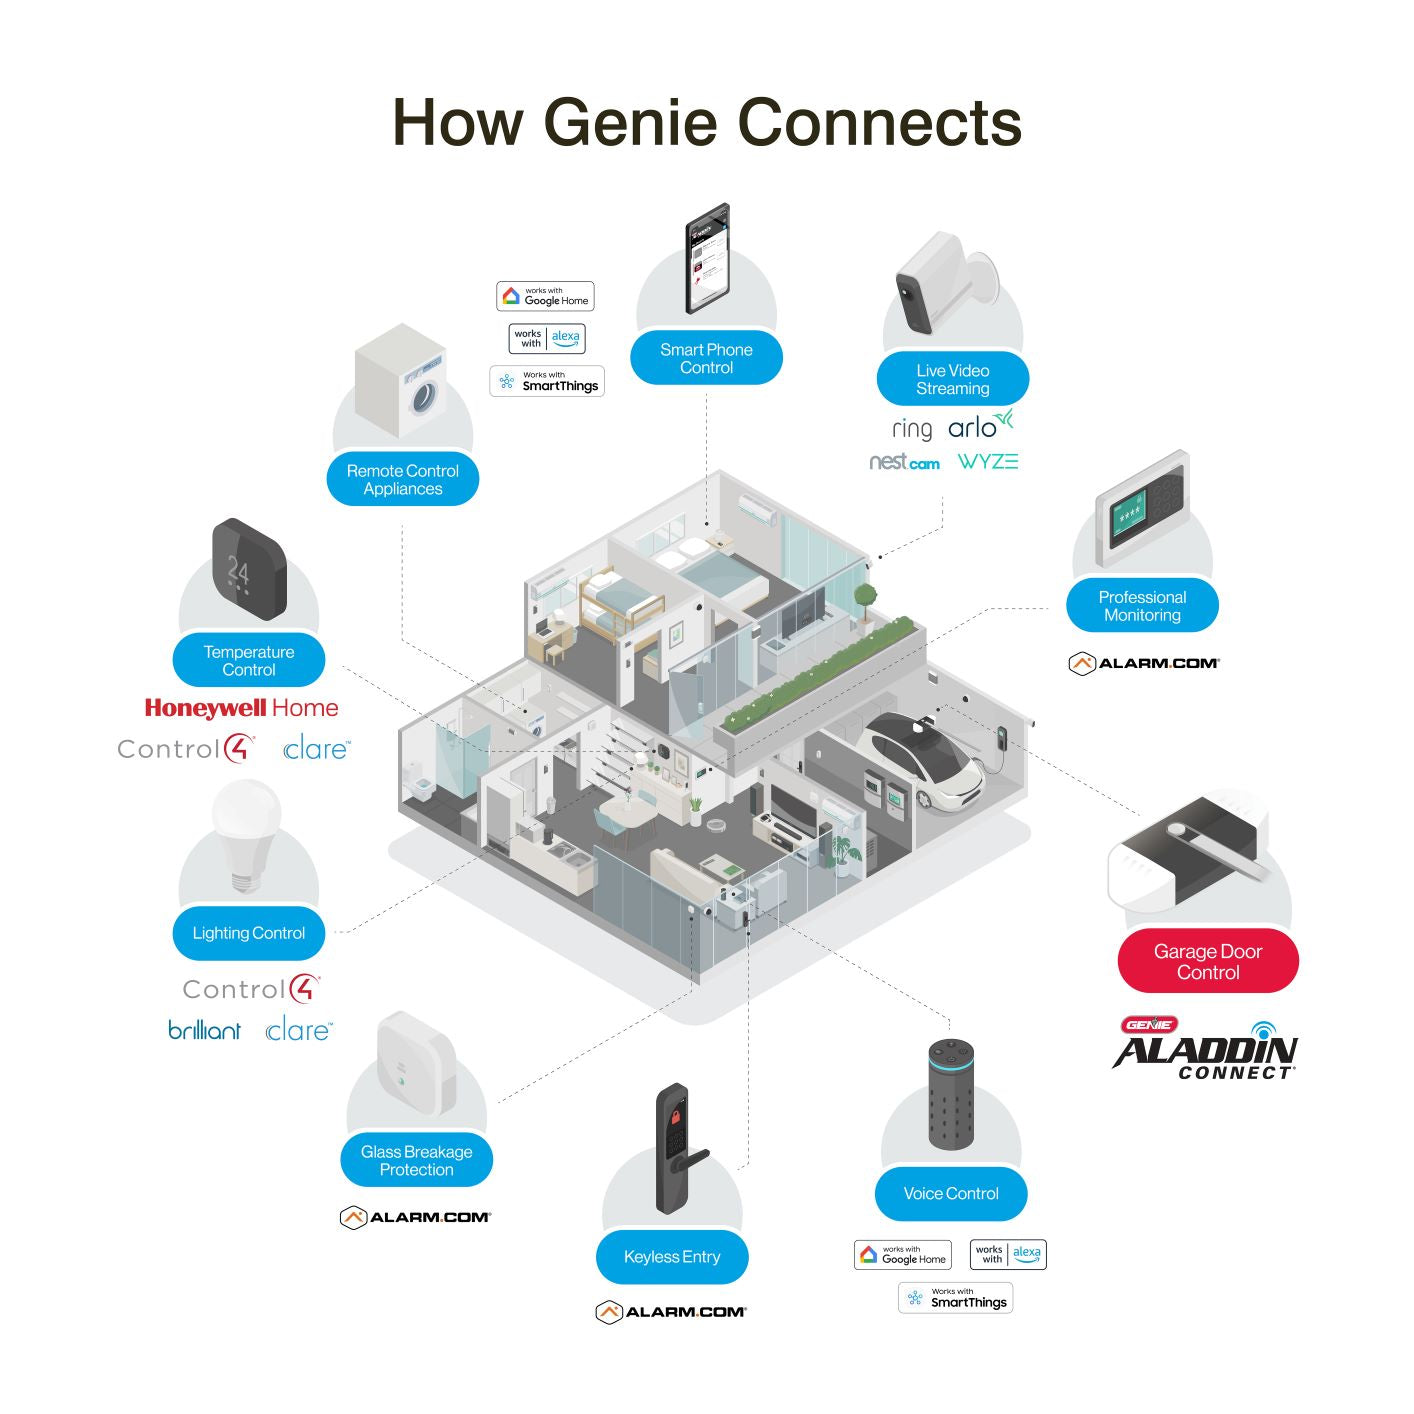 How Genie connects to the Smart Home Ecosystem